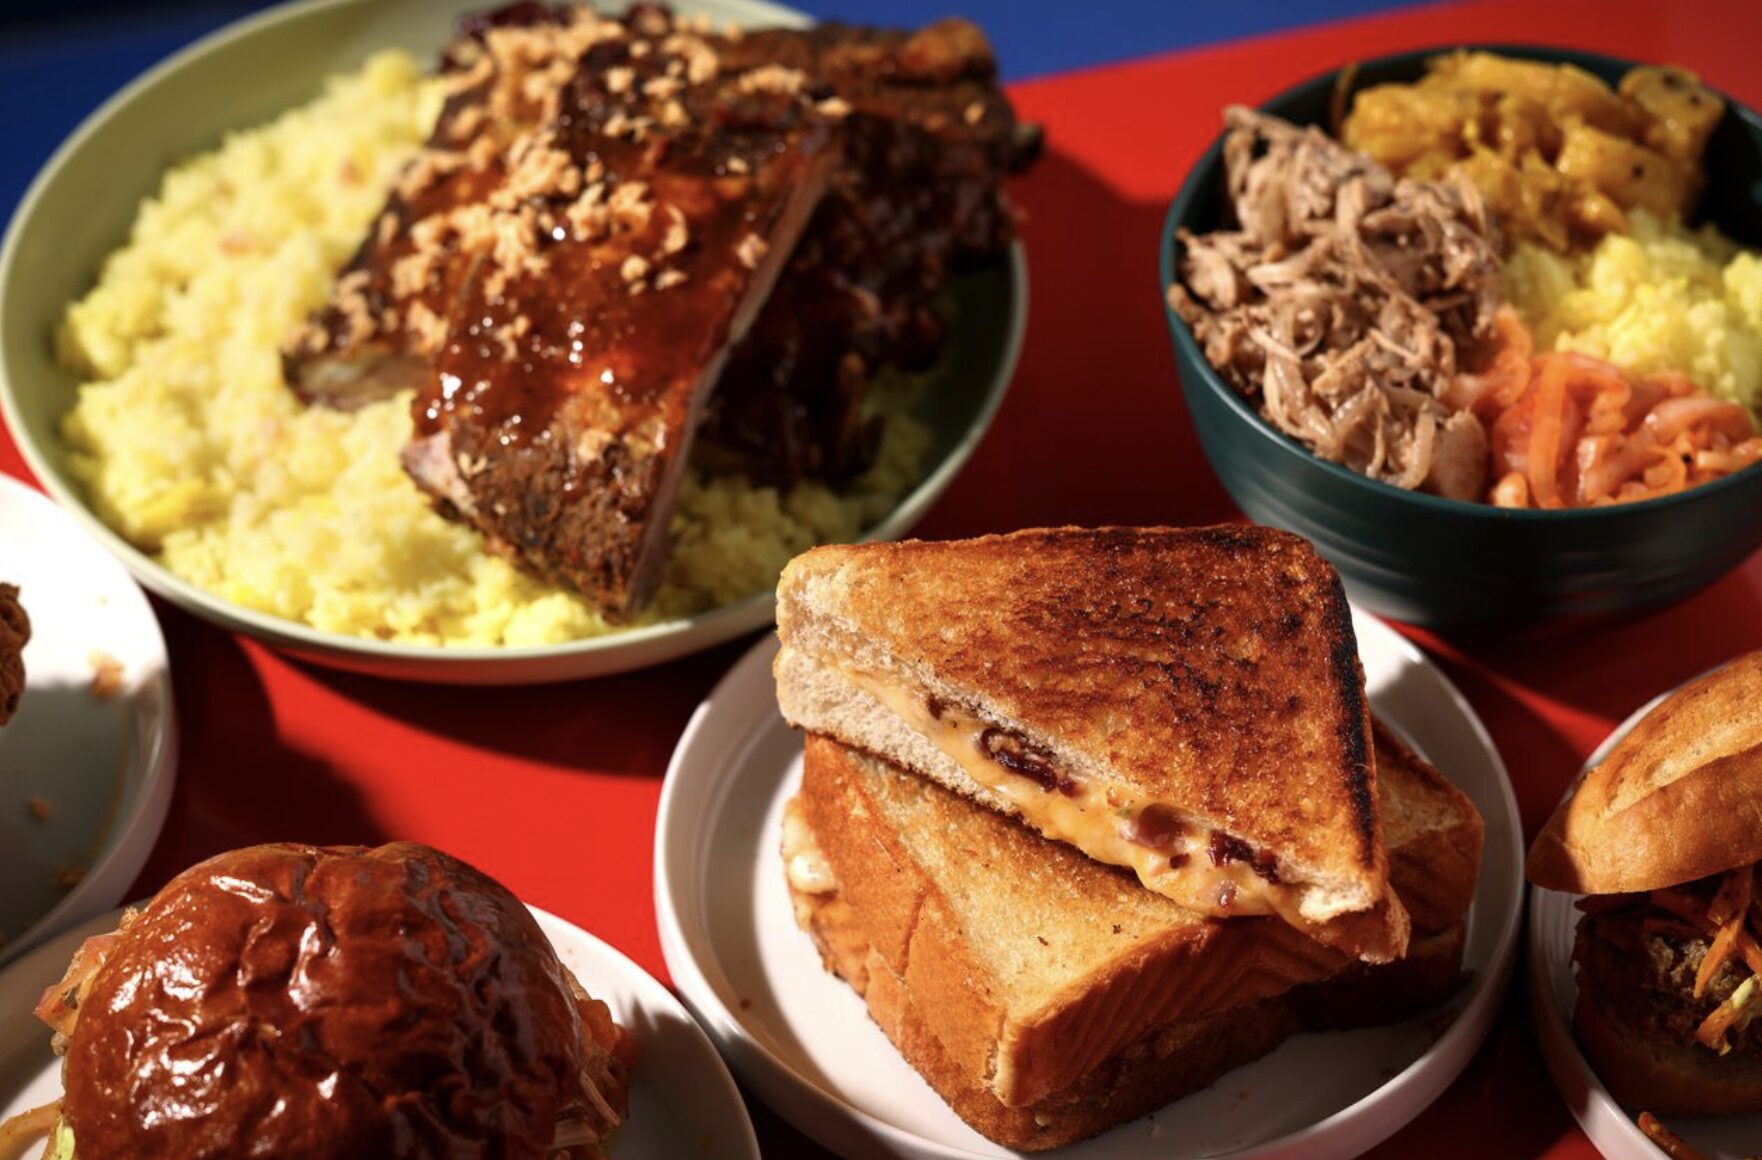 Southern dishes served at Tuk Tuk Snack Shop in Kentucky